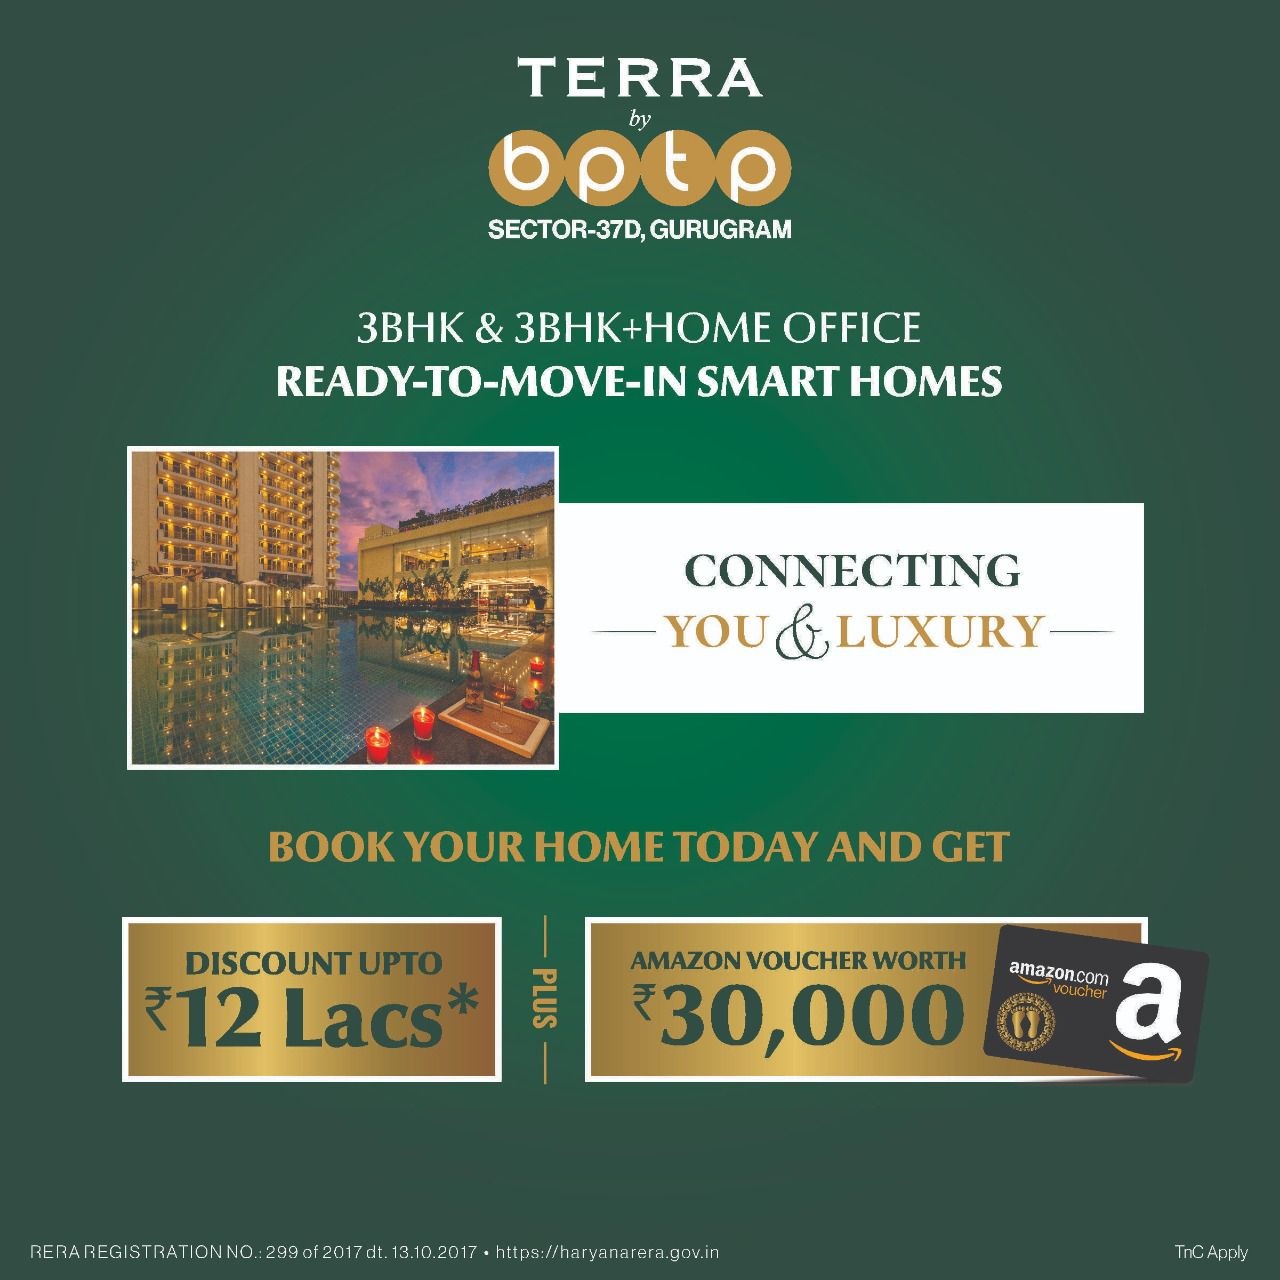 Book 3 & 3 BHK + home office ready to move in smart home at BPTP Terra in Sector 37D, Gurgaon Update